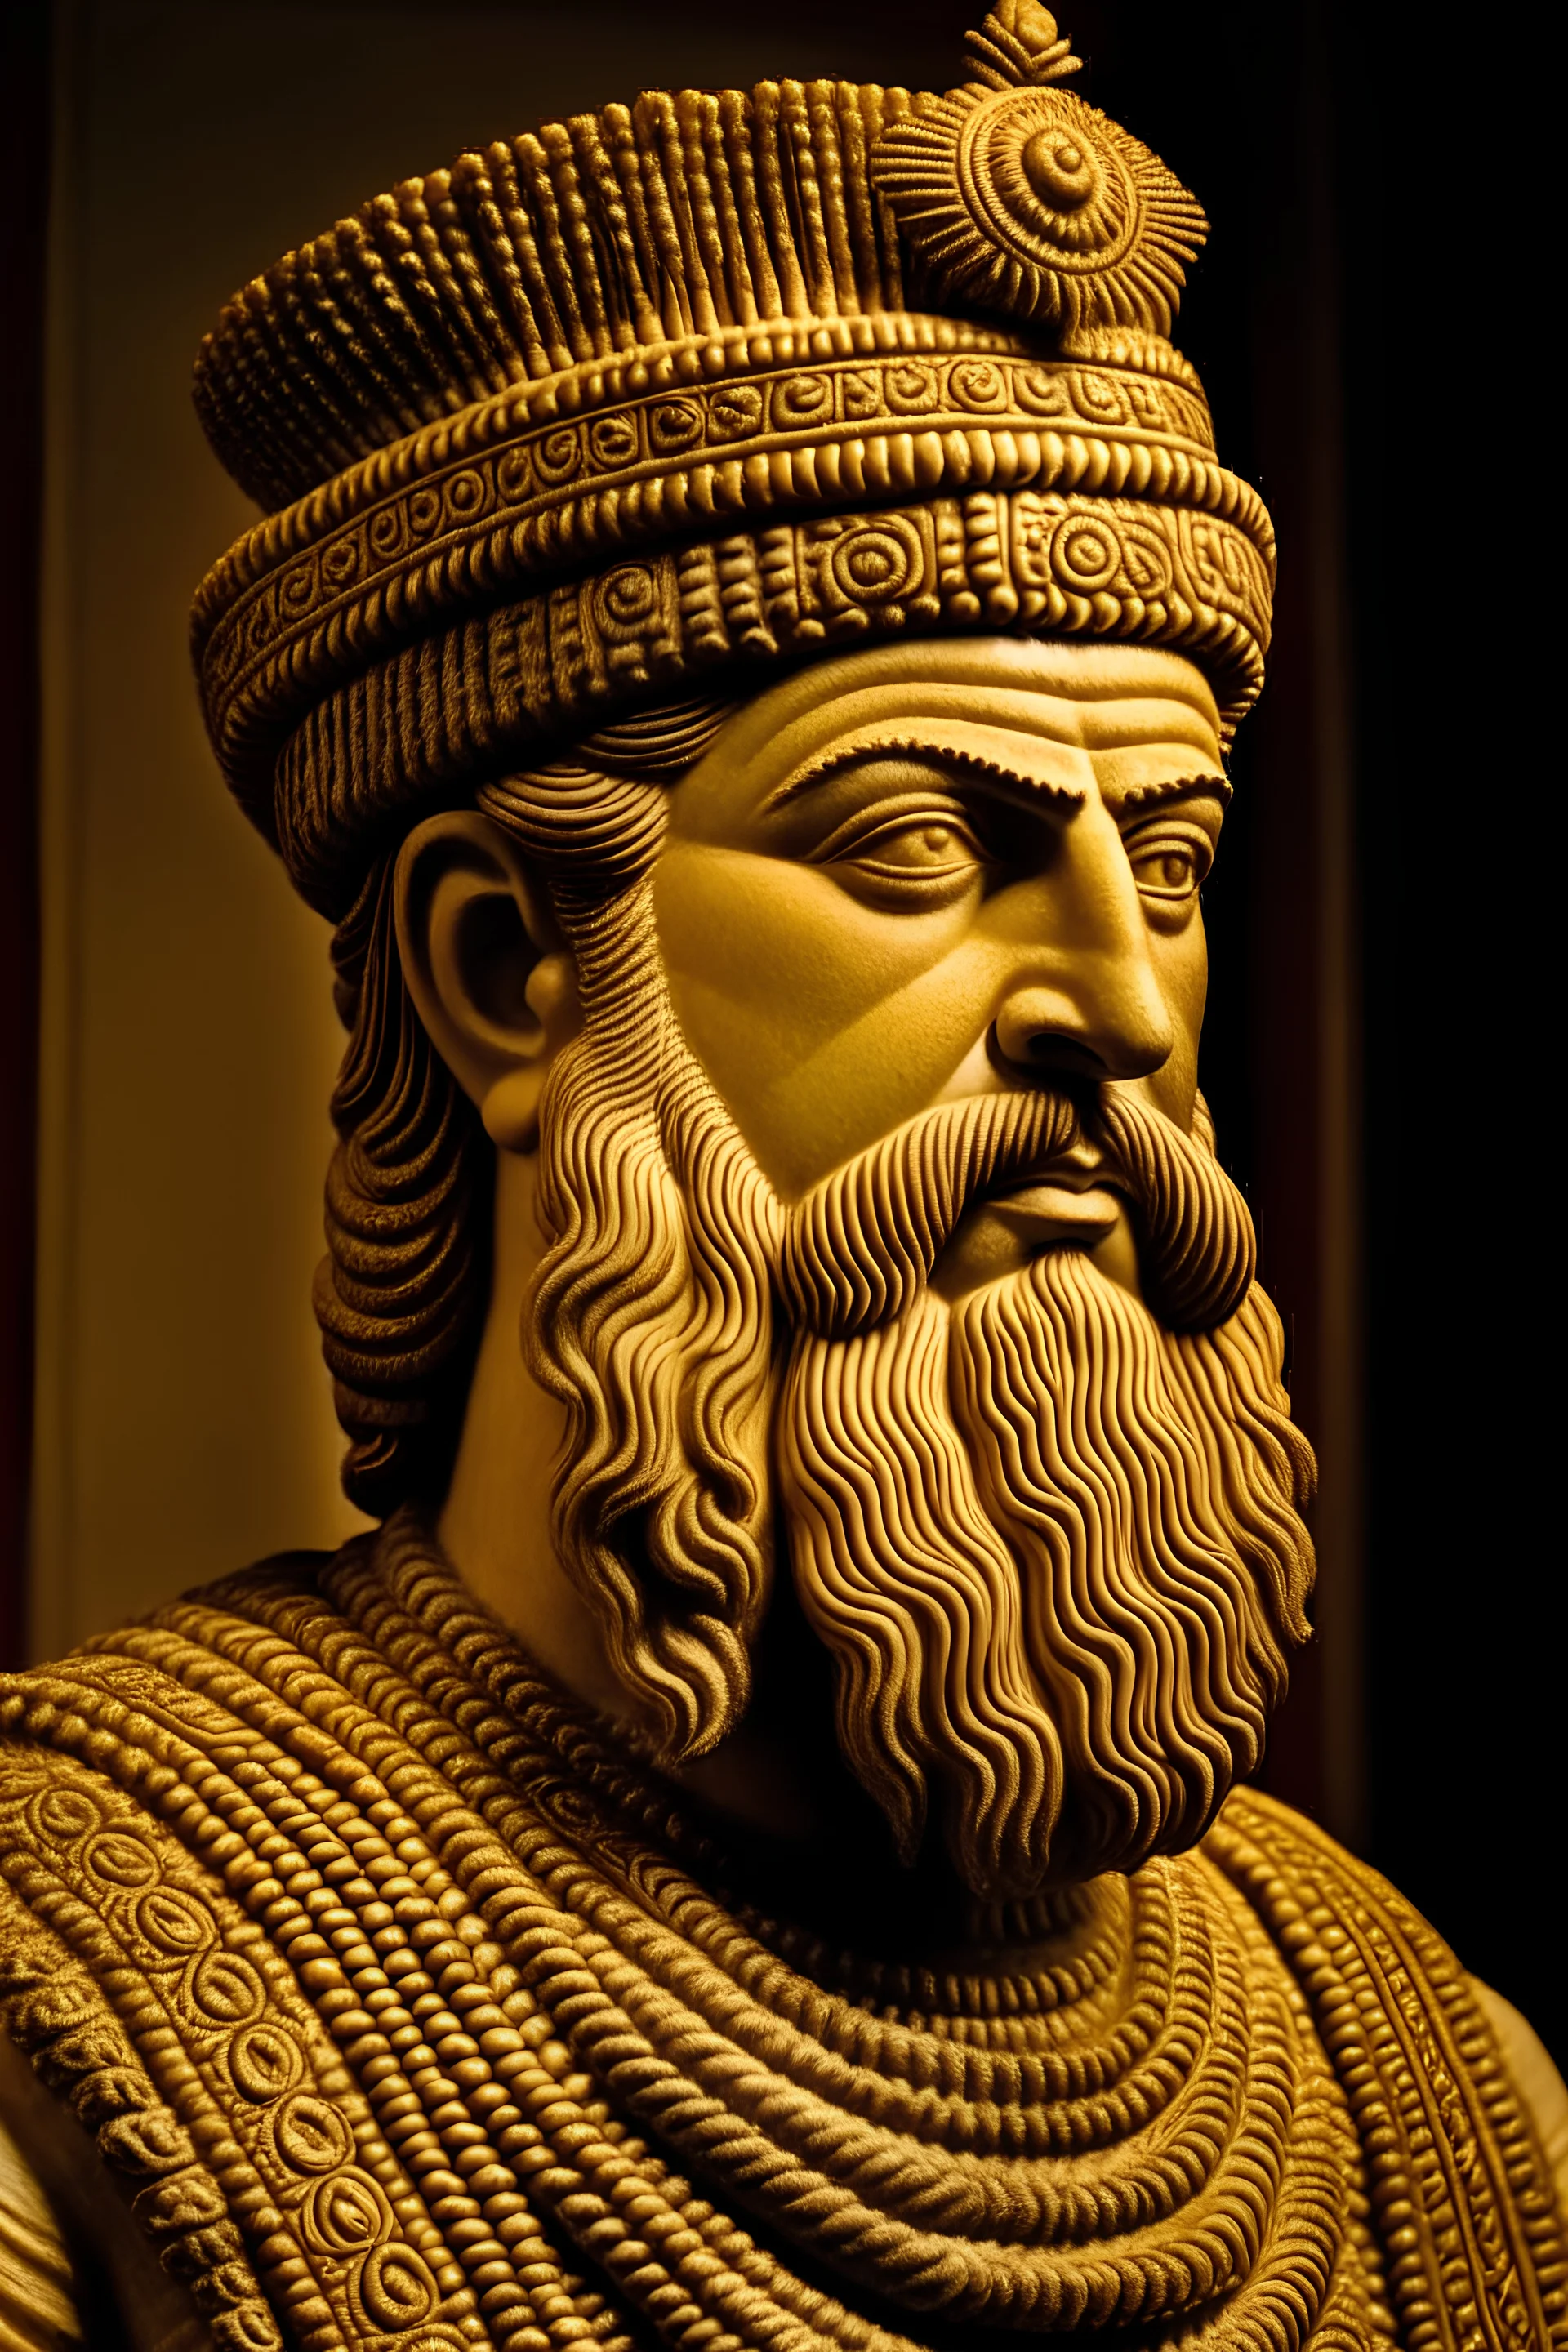 cyrus the great